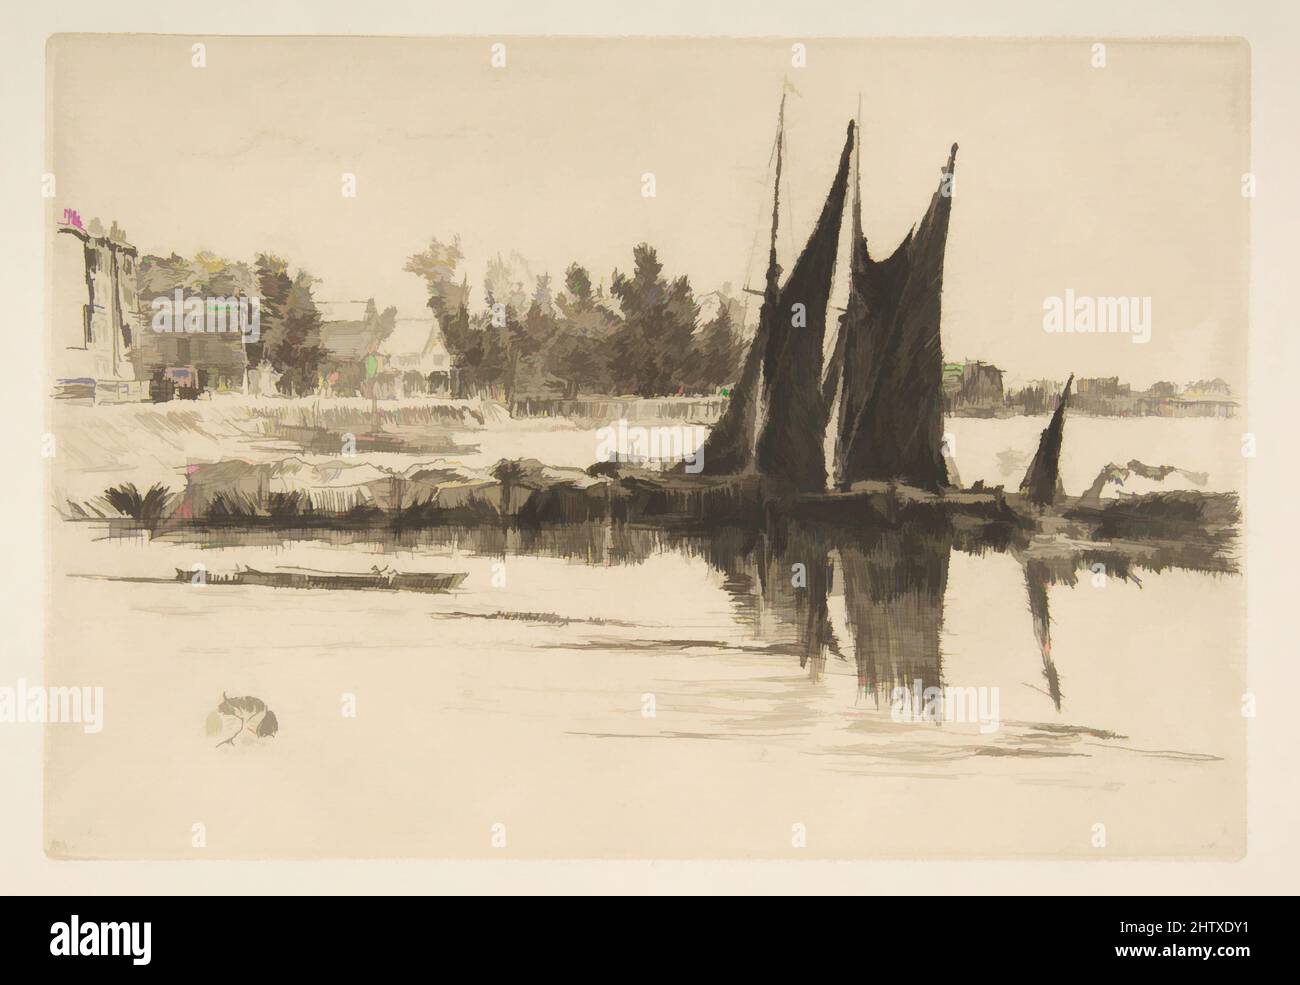 Art inspired by Hurlingham, 1879, Etching and drypoint; fourth state of four (Glasgow); printed in black ink on ivory laid paper, image: 5 7/16 x 7 15/16 in. (13.8 x 20.1 cm), Prints, James McNeill Whistler (American, Lowell, Massachusetts 1834–1903 London, Classic works modernized by Artotop with a splash of modernity. Shapes, color and value, eye-catching visual impact on art. Emotions through freedom of artworks in a contemporary way. A timeless message pursuing a wildly creative new direction. Artists turning to the digital medium and creating the Artotop NFT Stock Photo